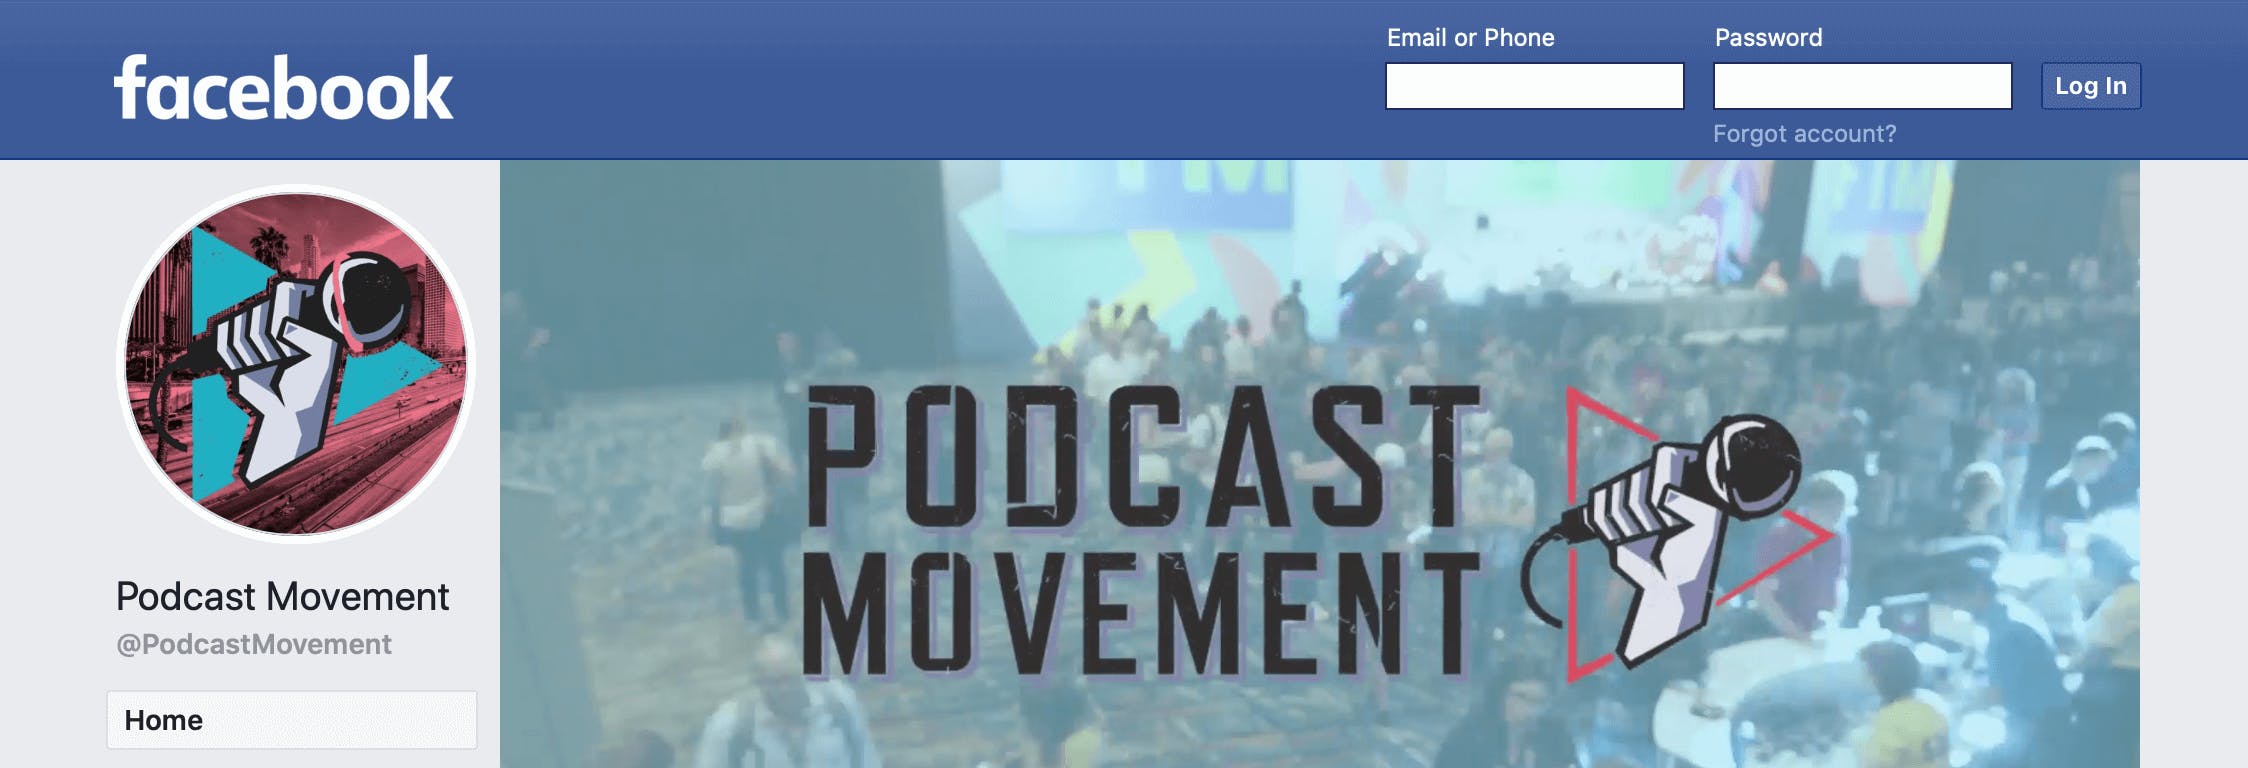 Podcast Movement Facebook page